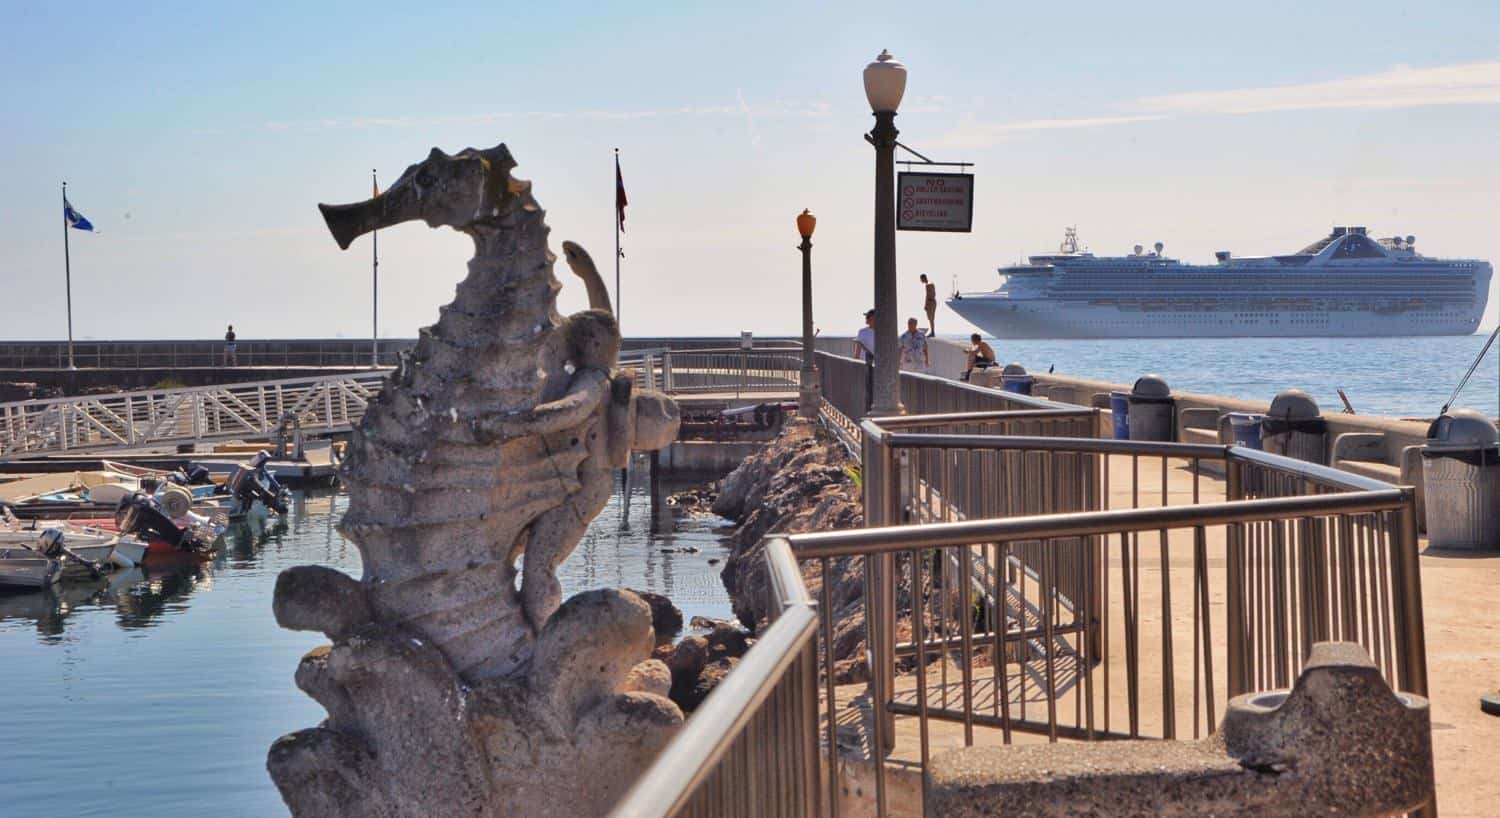 Seahorse sculpture in the harbor with docked boats and a cruise ship in the background